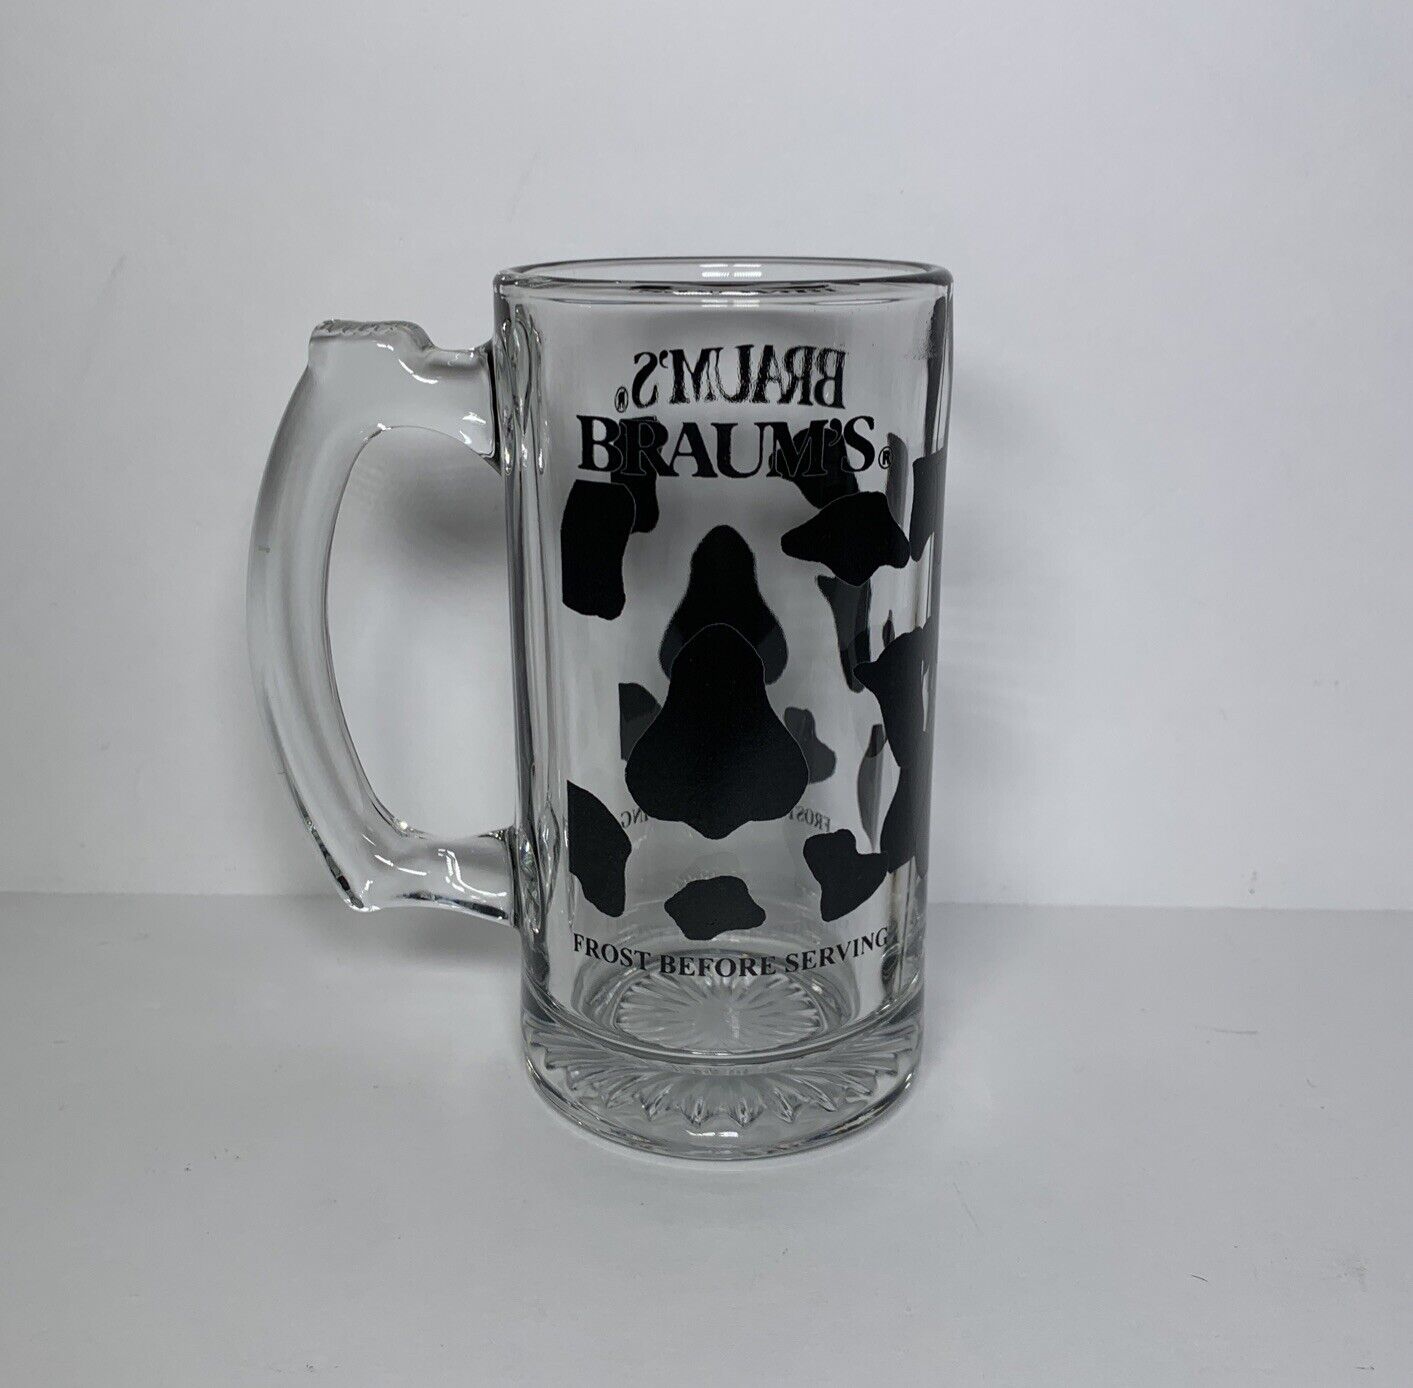 Braum’s Root Beer Float Glass Mug Frost Before Serving Cow Spots Ice Cream Mug